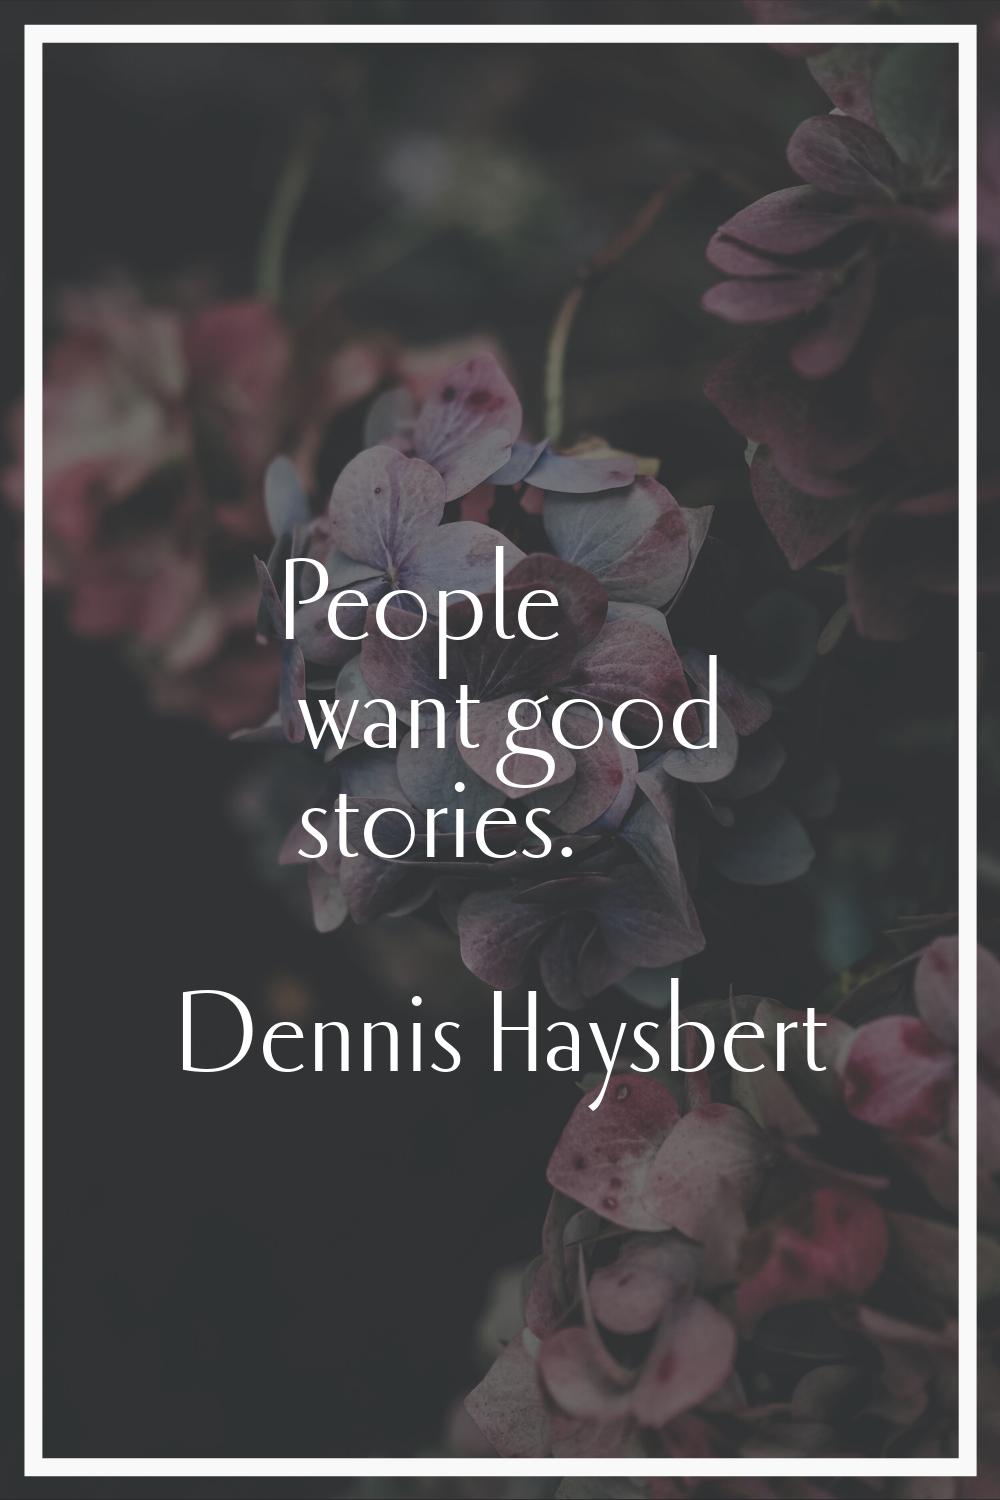 People want good stories.